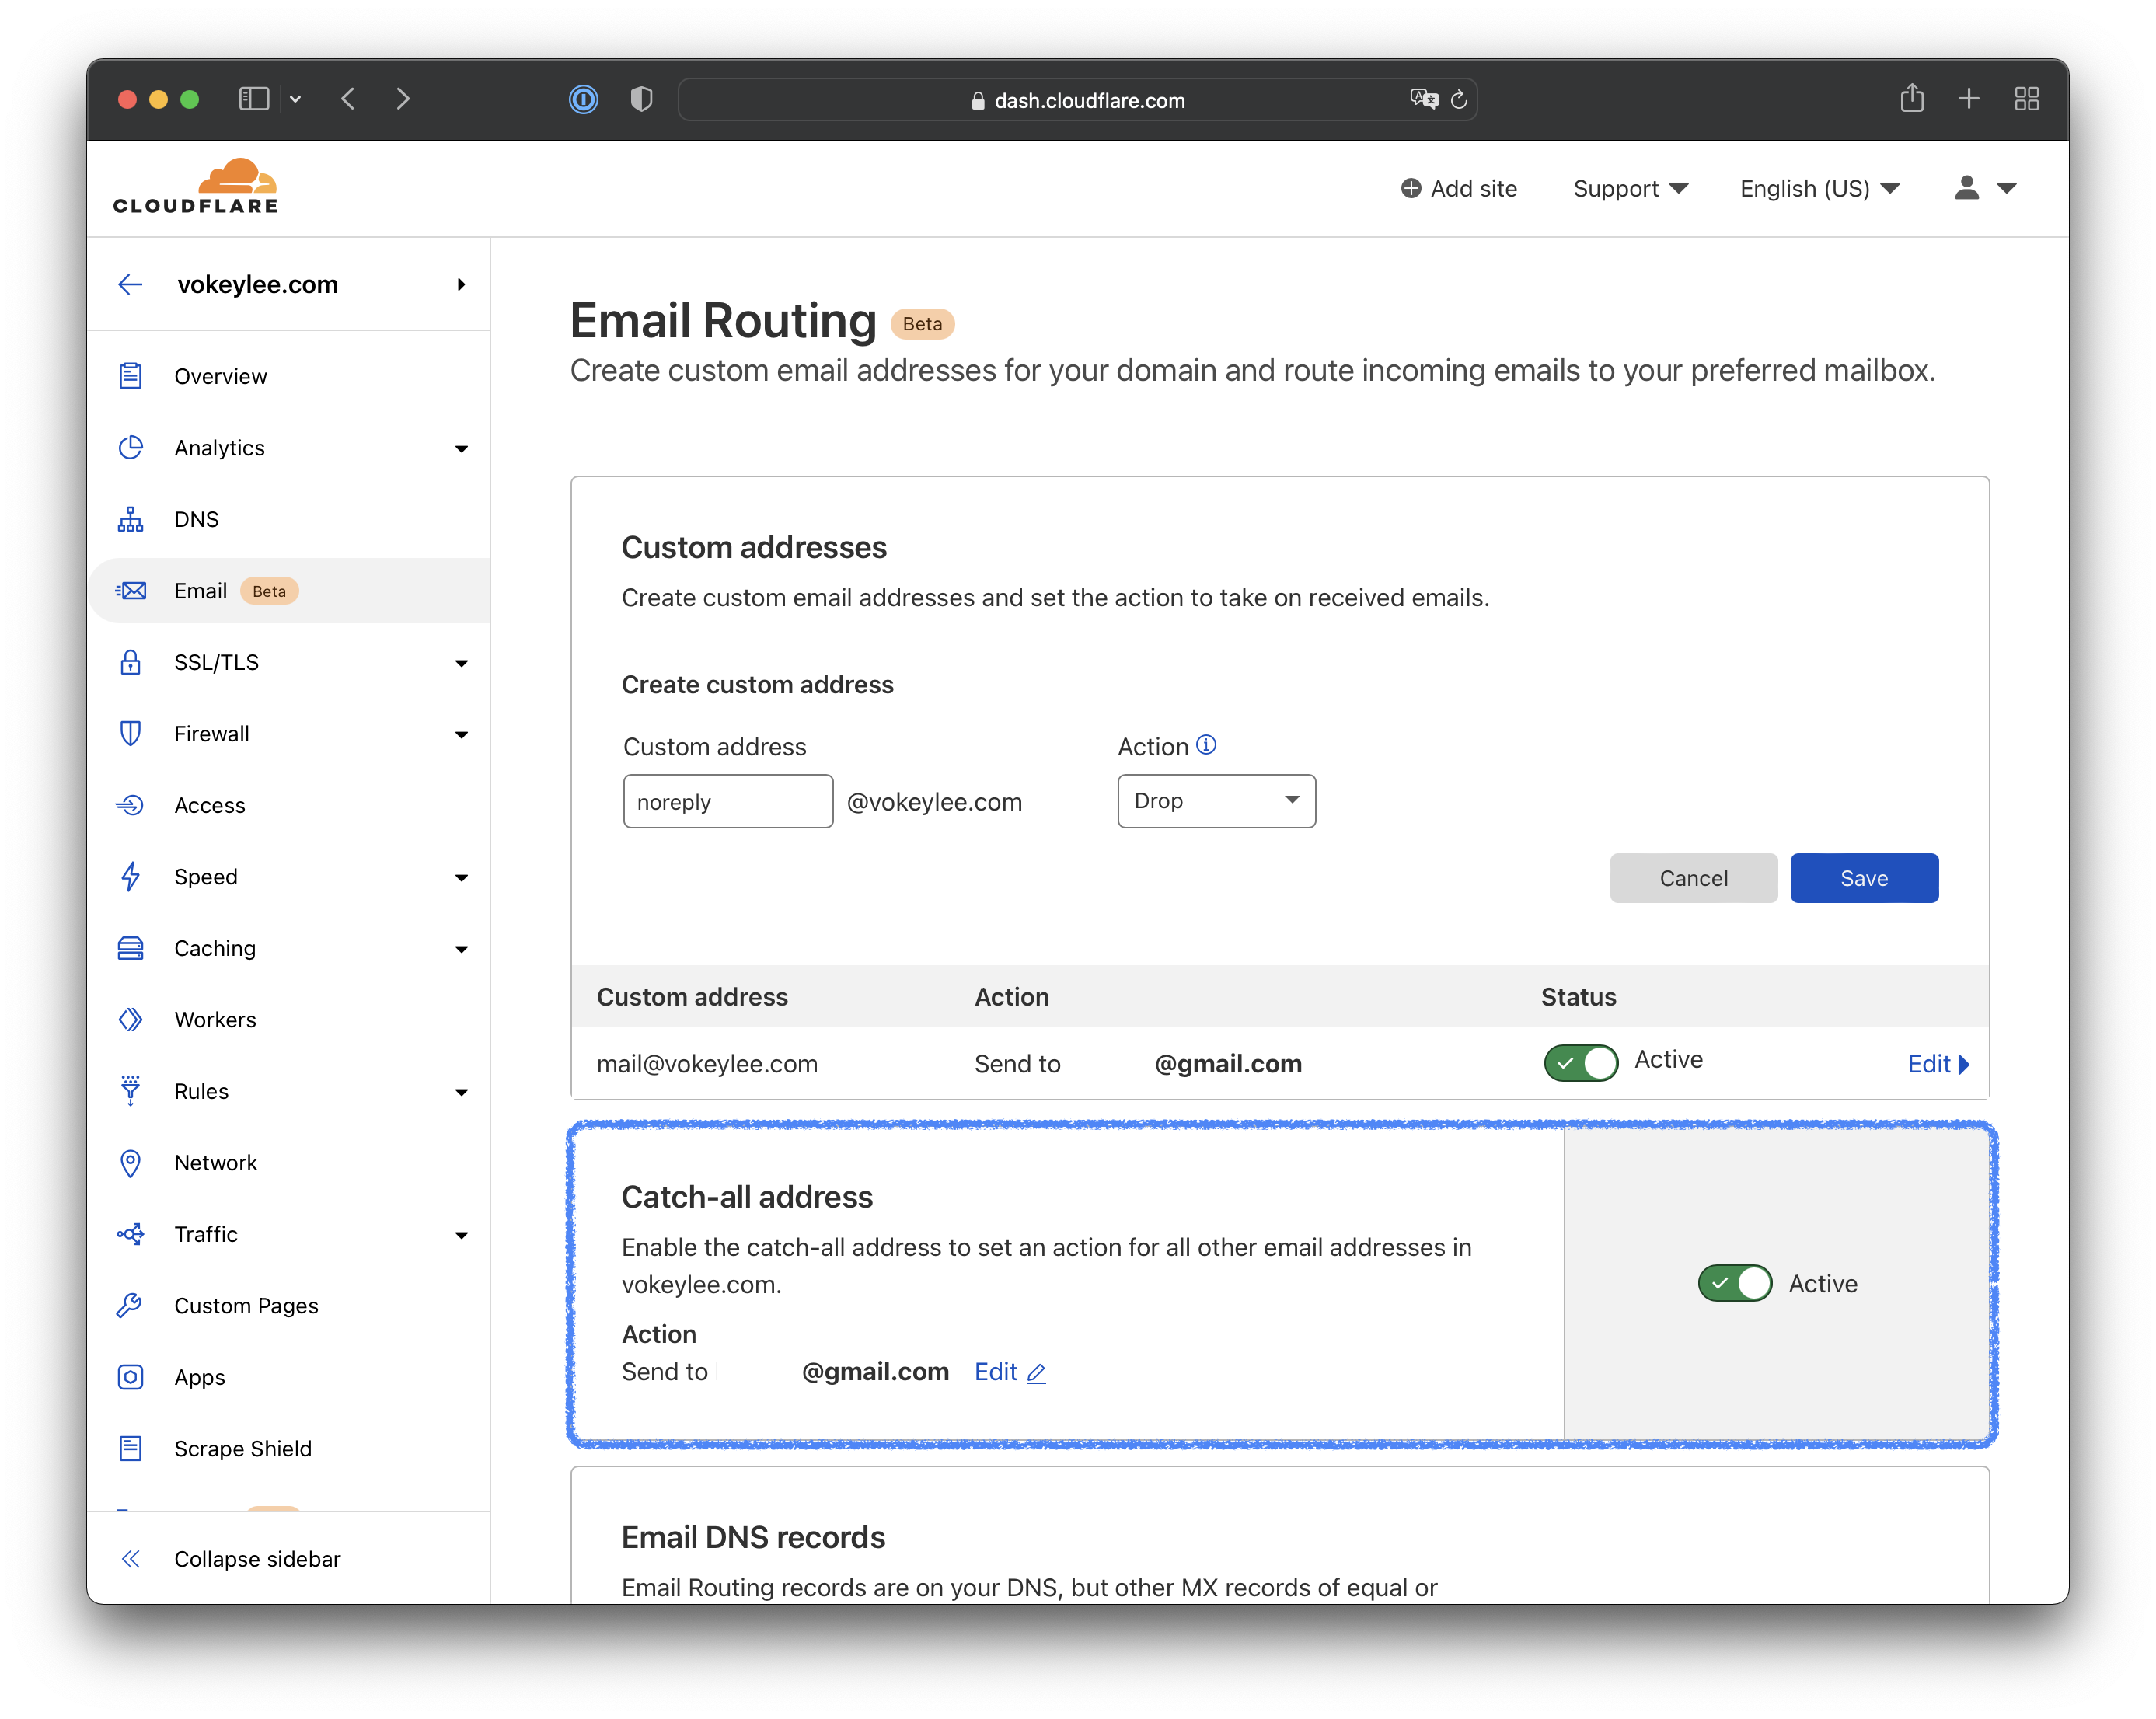 Cloudflare Email Routing setting page.